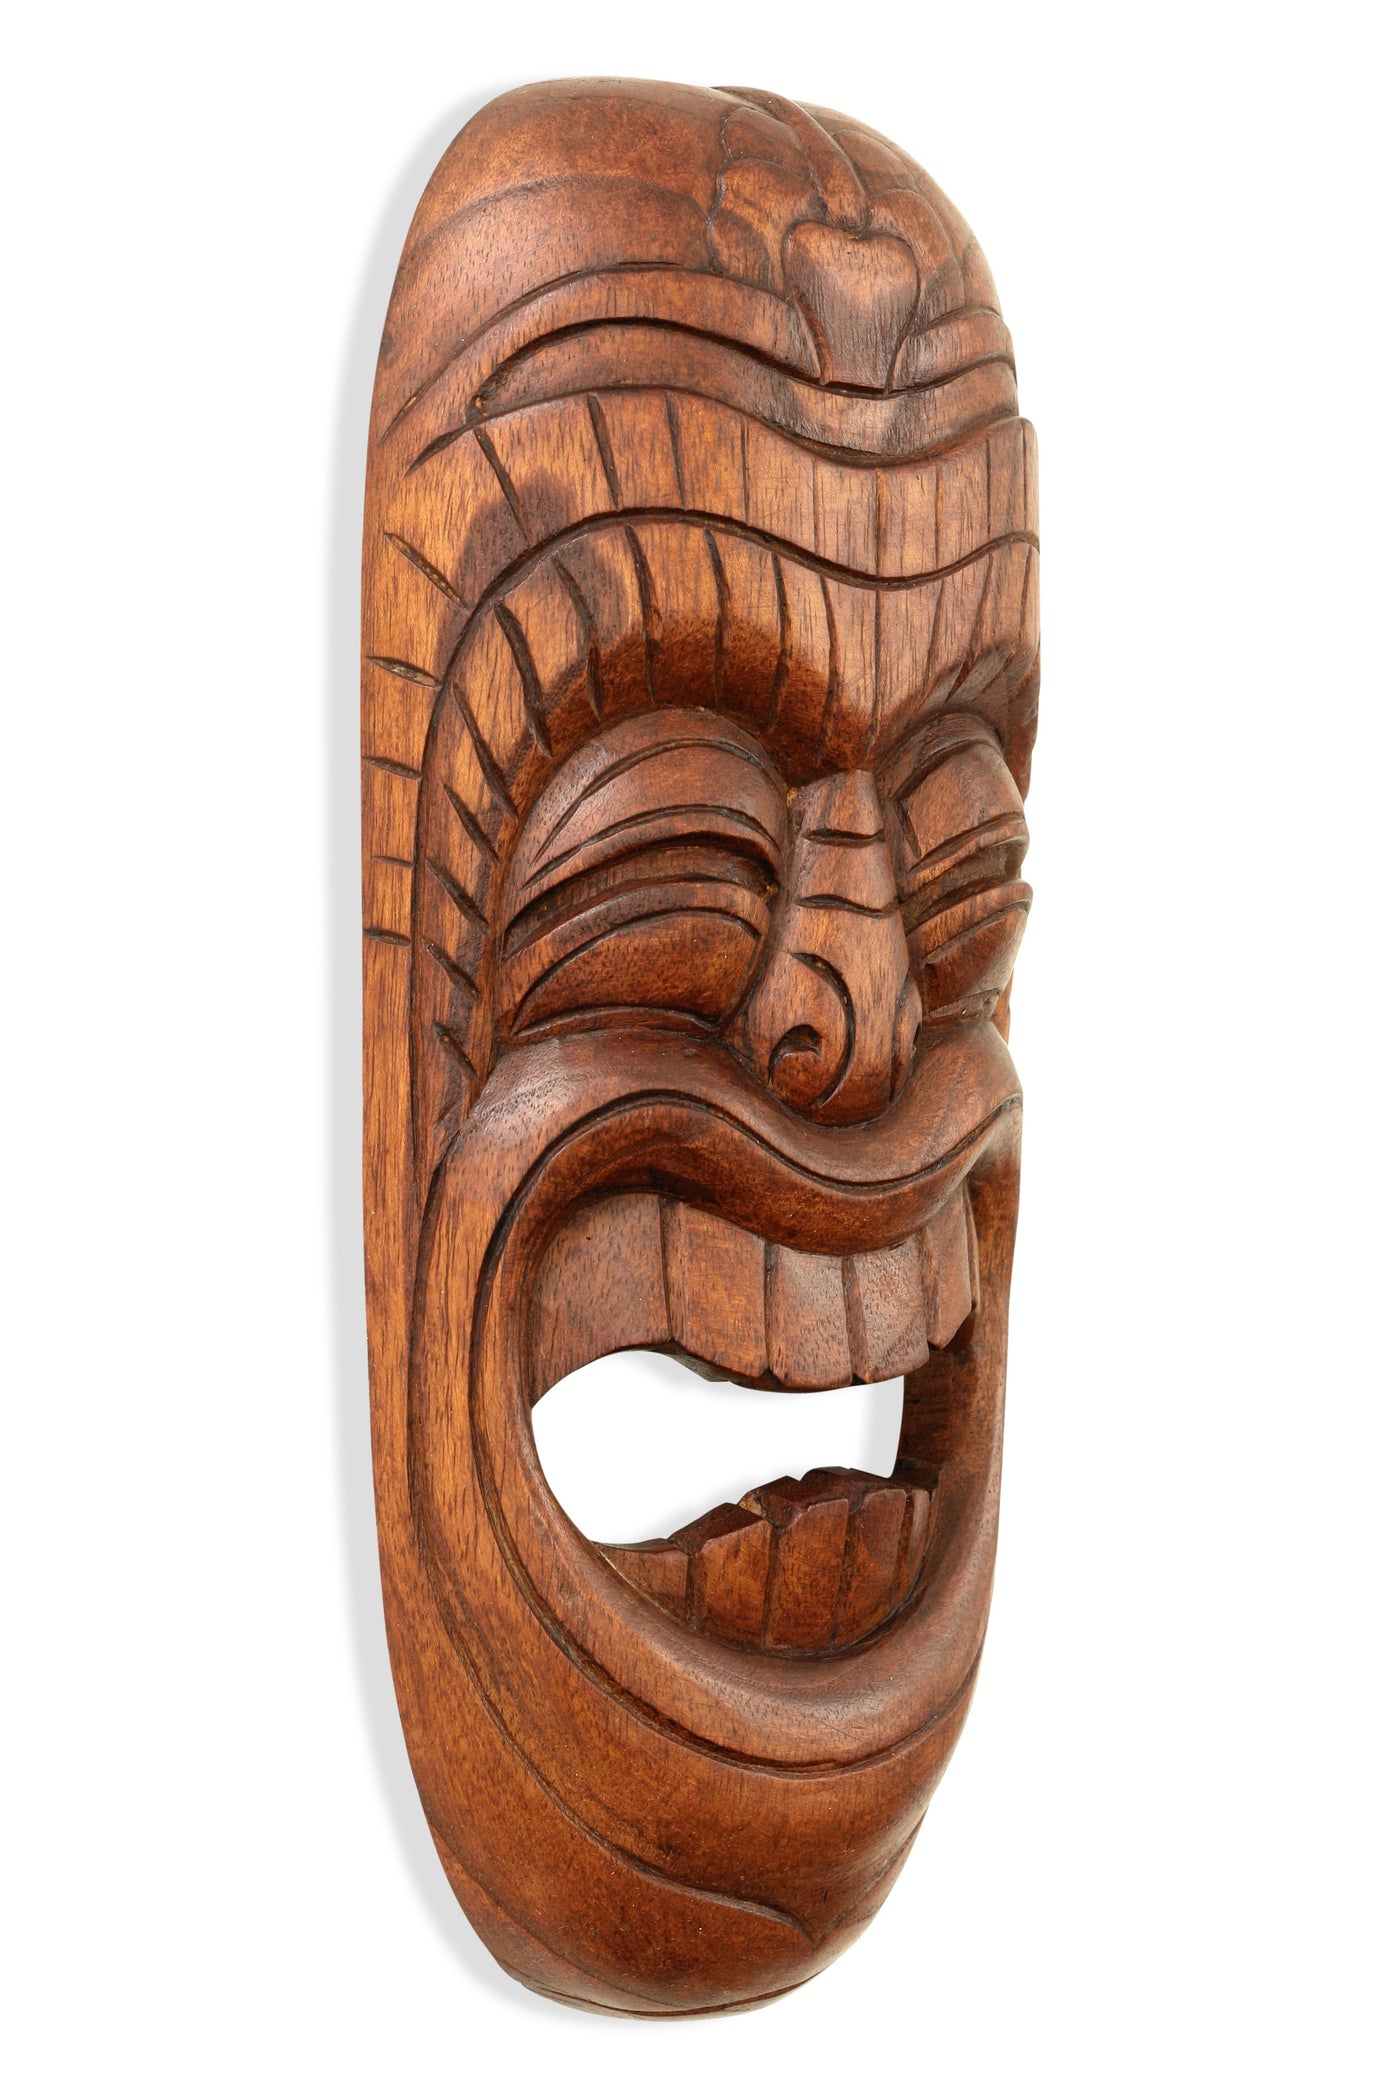 Wooden Tribal African Laughing Mask Hand Carved Wall Plaque Hanging Home Decor Accent Art Unique Sculpture Decoration Handmade Handcrafted Decorative